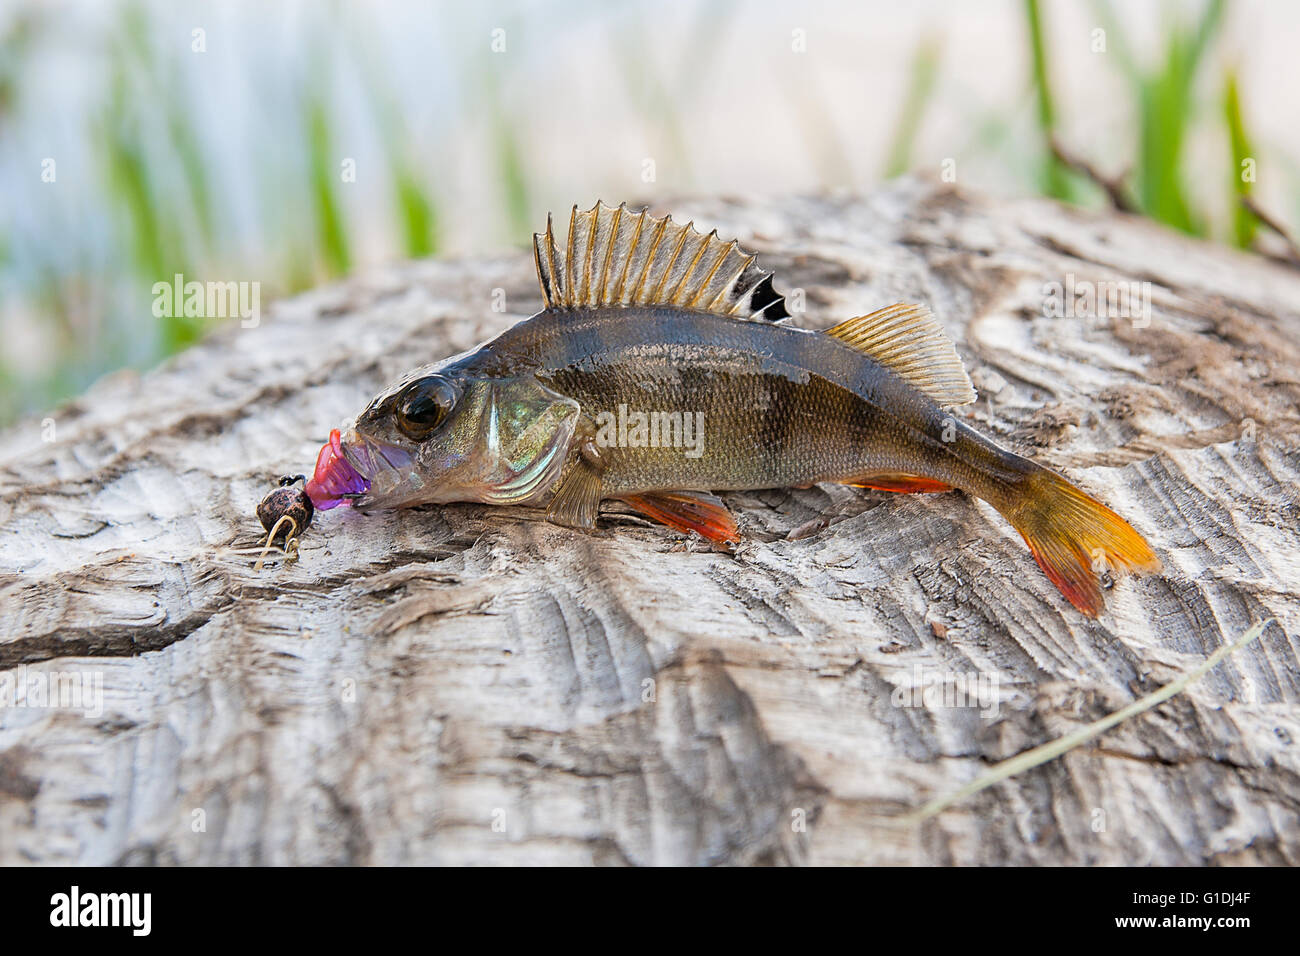 Perch fish just taken from the water on natural background. Perch fish with silicon bait. Stock Photo